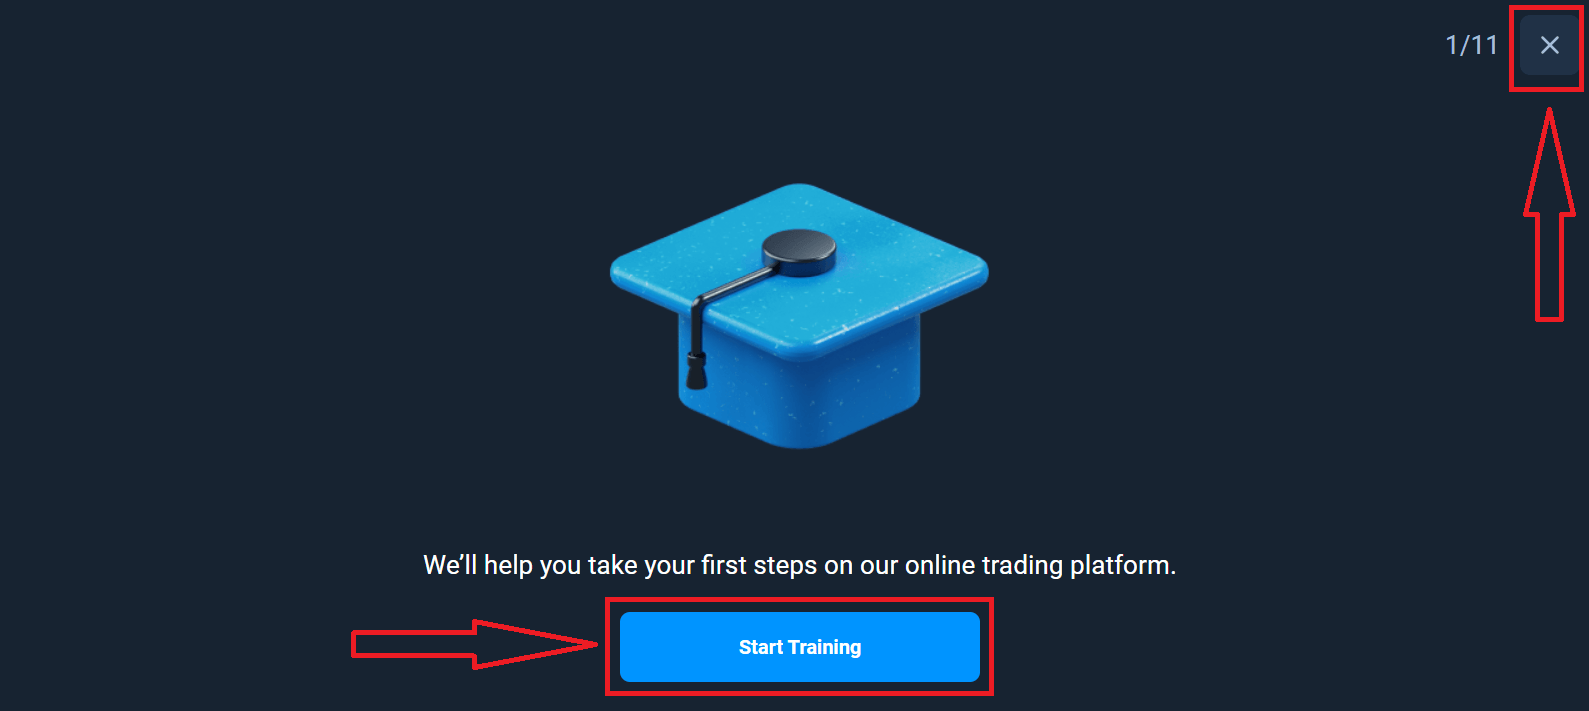 How to Sign Up and Login Account in Olymp Trade